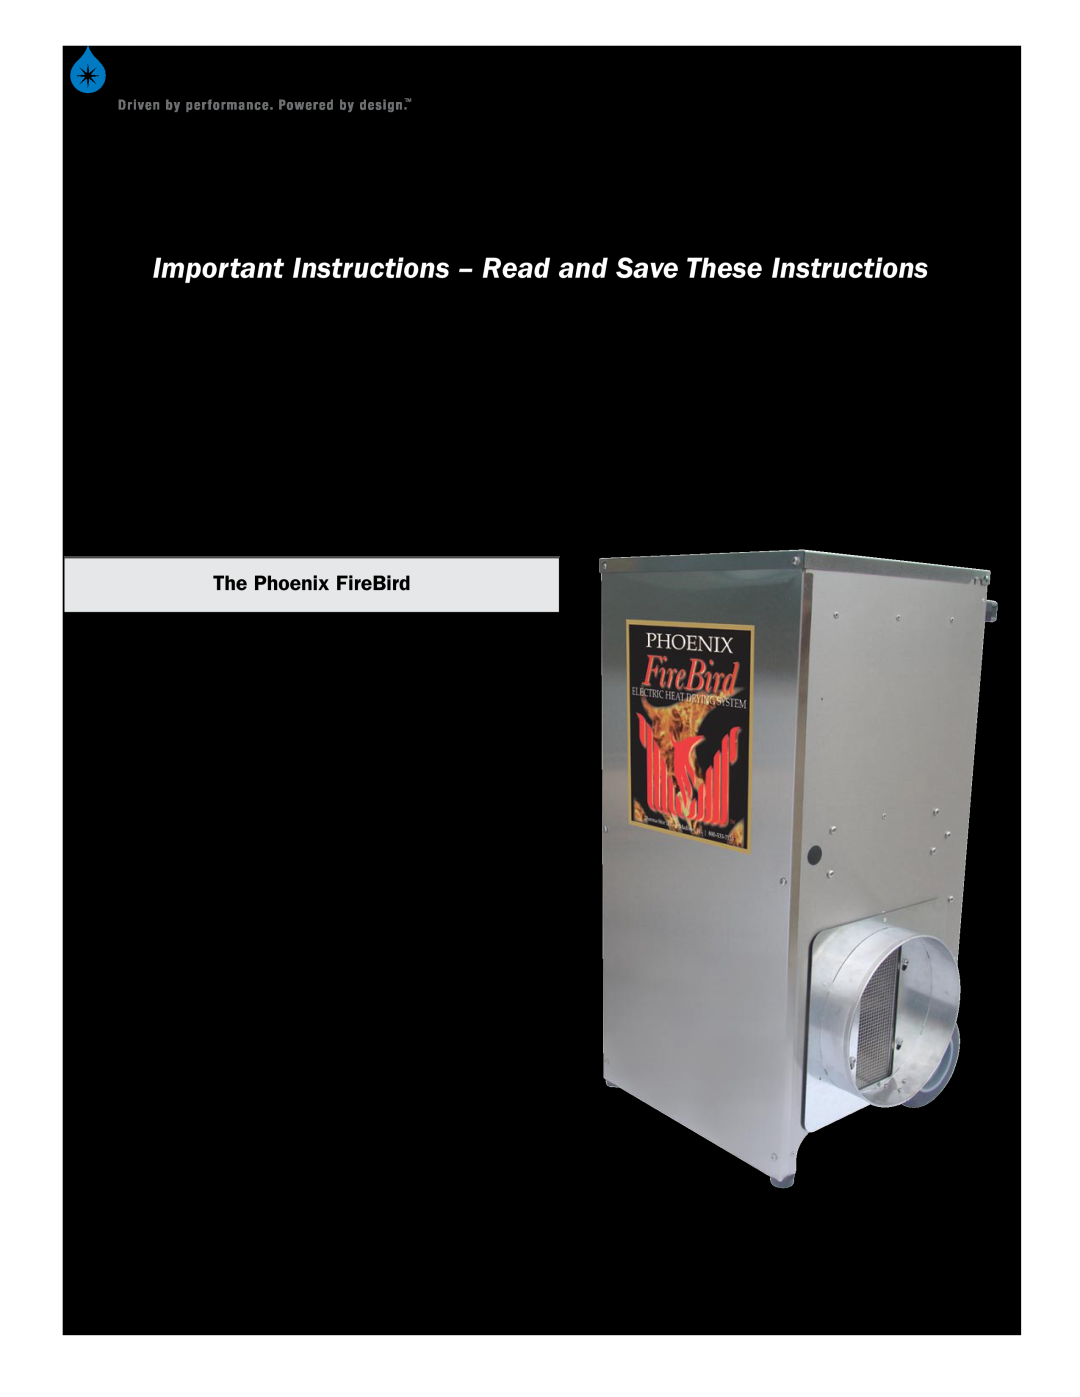 Therma-Stor Products Group PN 4027300 owner manual The Phoenix FireBird, Owner’s Manual — Phoenix FireBird 